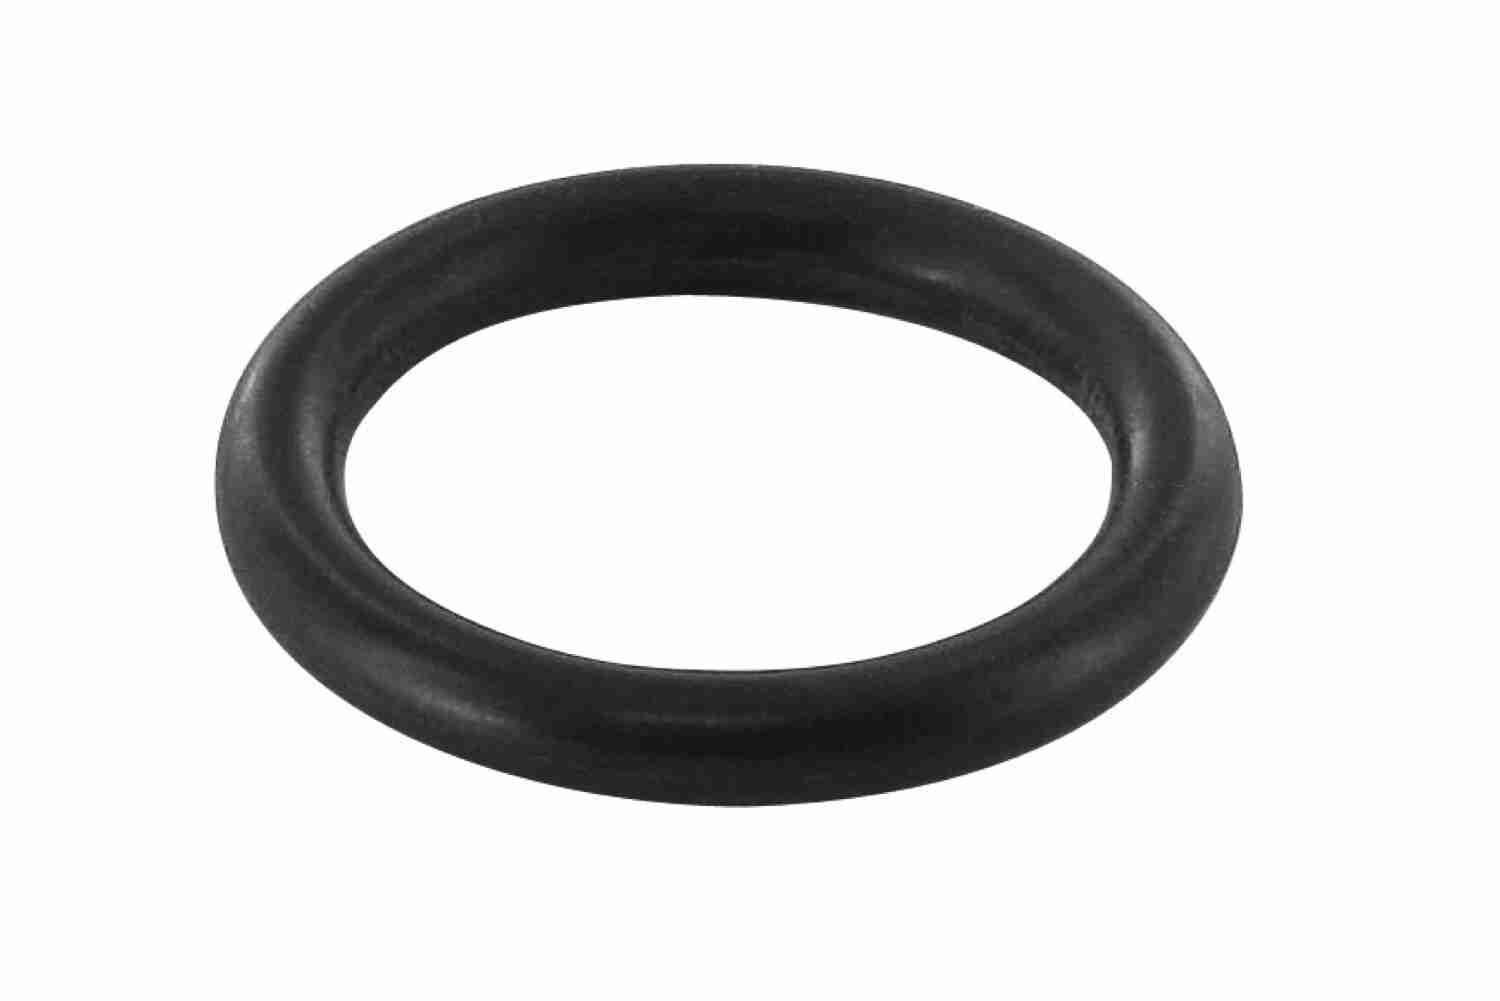 Renault ESPACE Fasteners parts - Seal Ring VEMO V99-99-0001